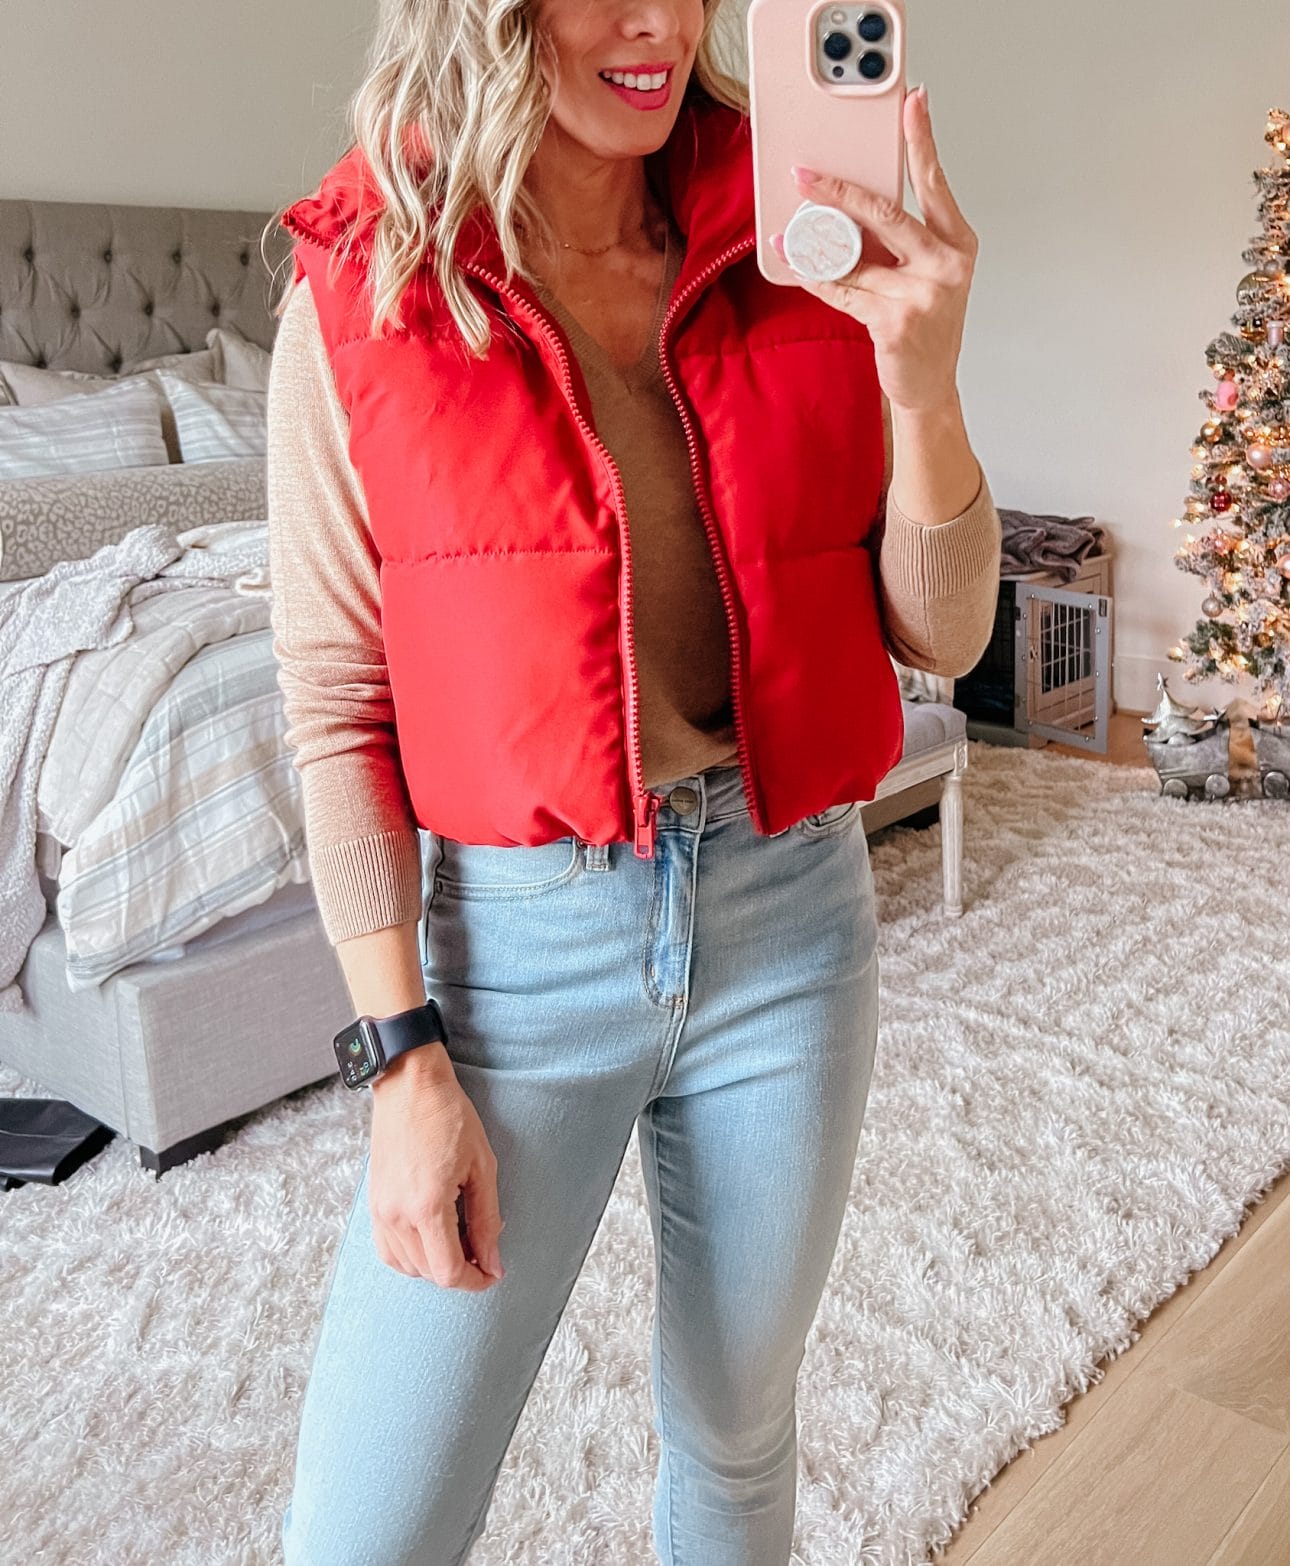 Long Sleeve Top, PUffer Vest, Jeans